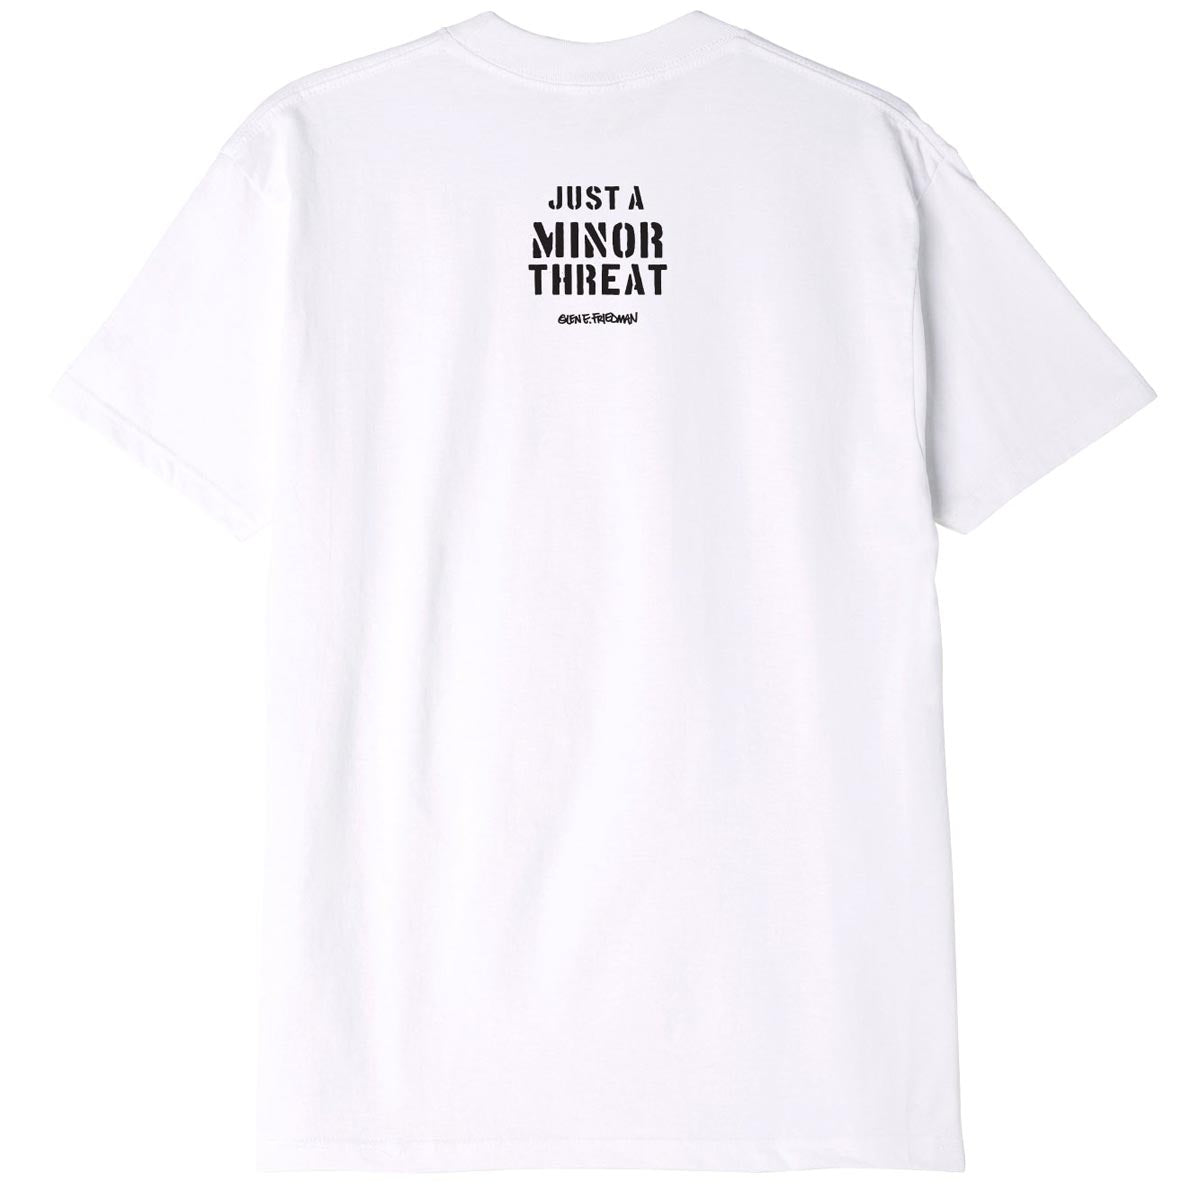 Obey Gef Just A Minor Threat T-Shirt - White image 2